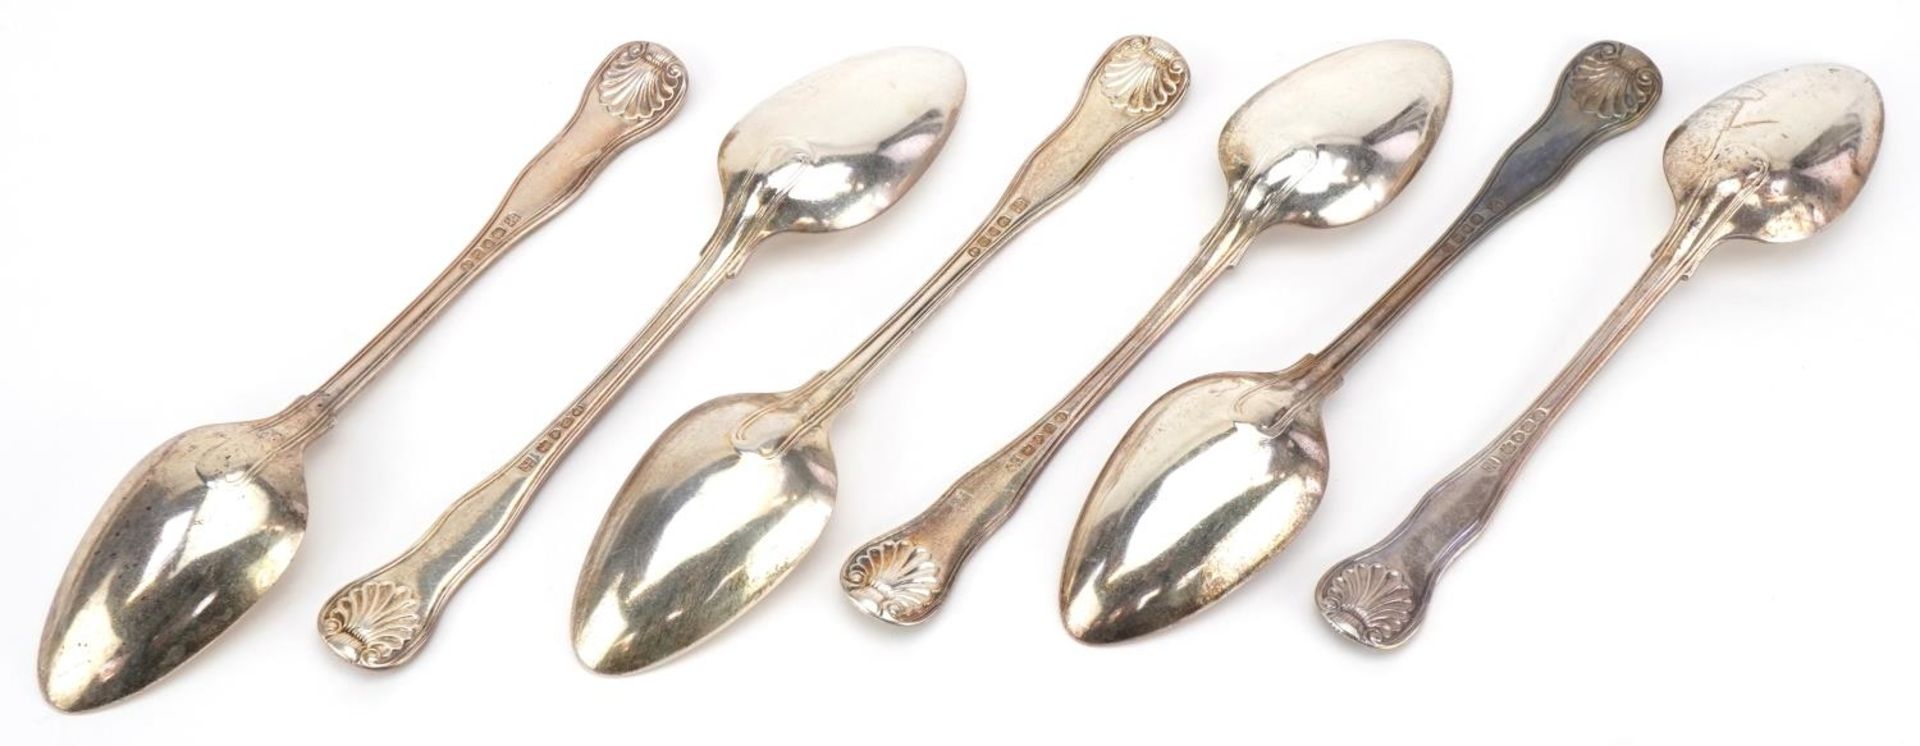 Morris & Michael Emmanuel, set of six George IV silver tablespoons, London 1828, 23cm in length, - Image 2 of 3